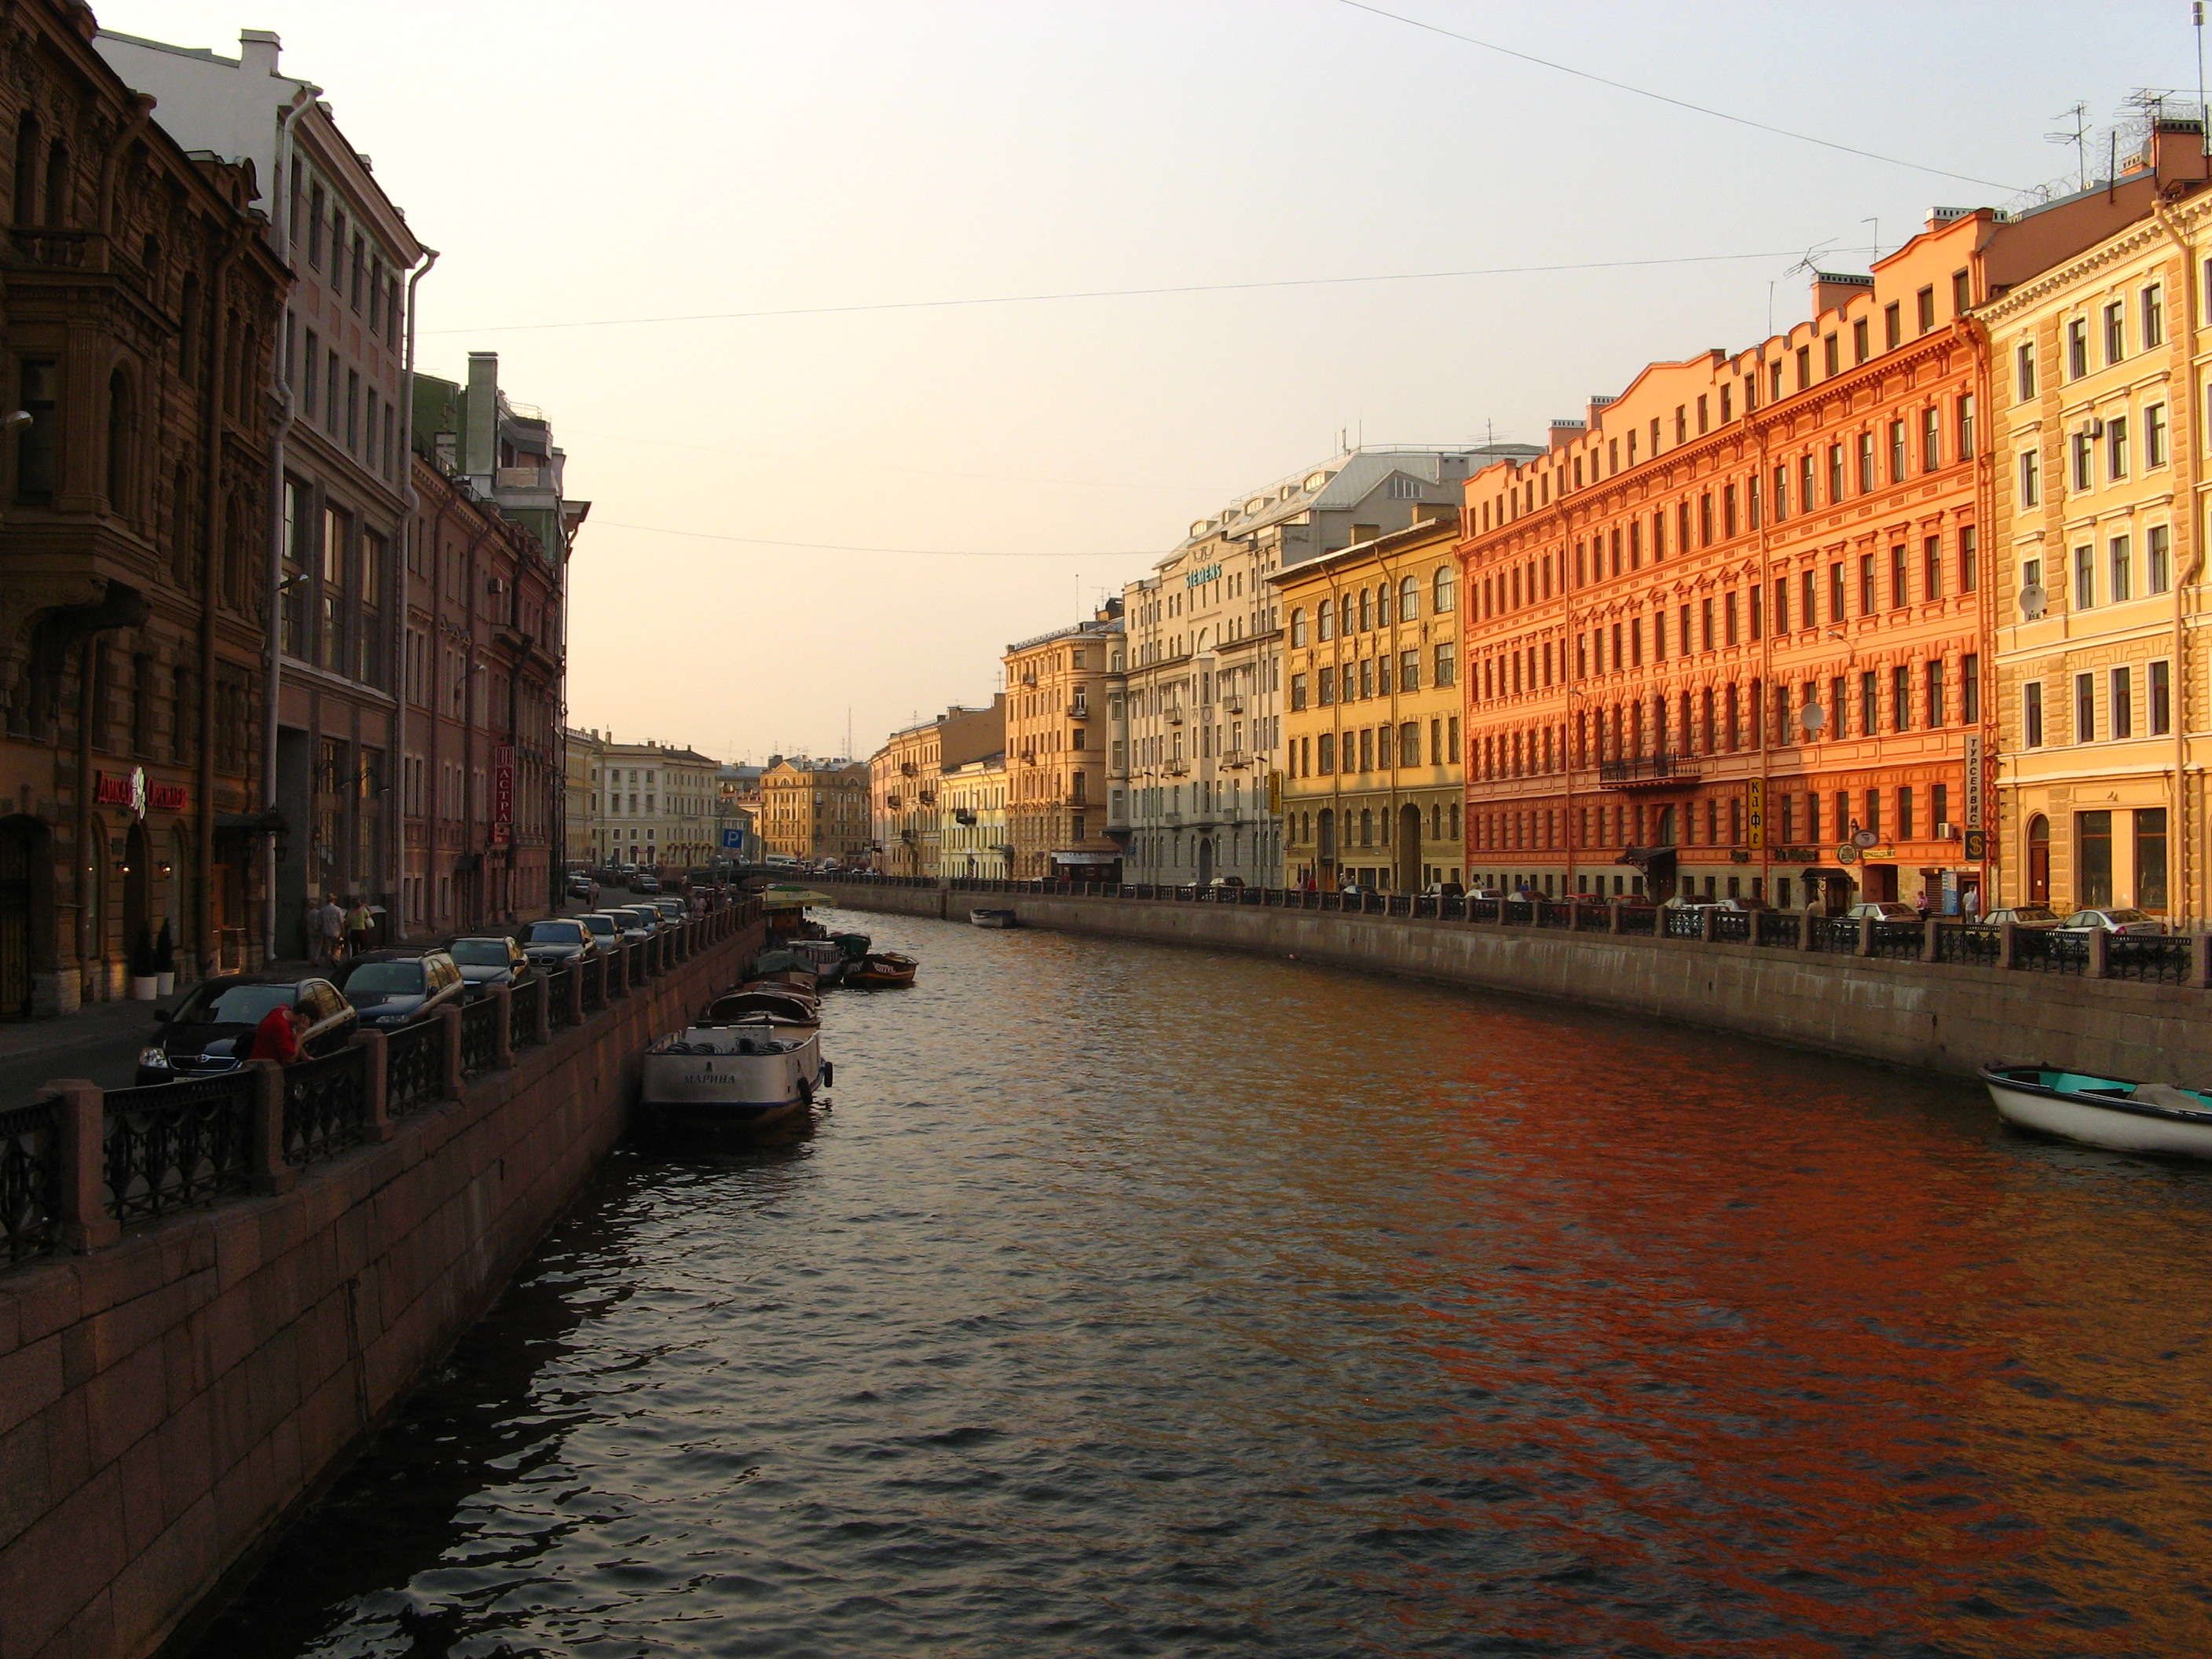 Earth Views): Russia St Petersburg canal brightly coloured building ...